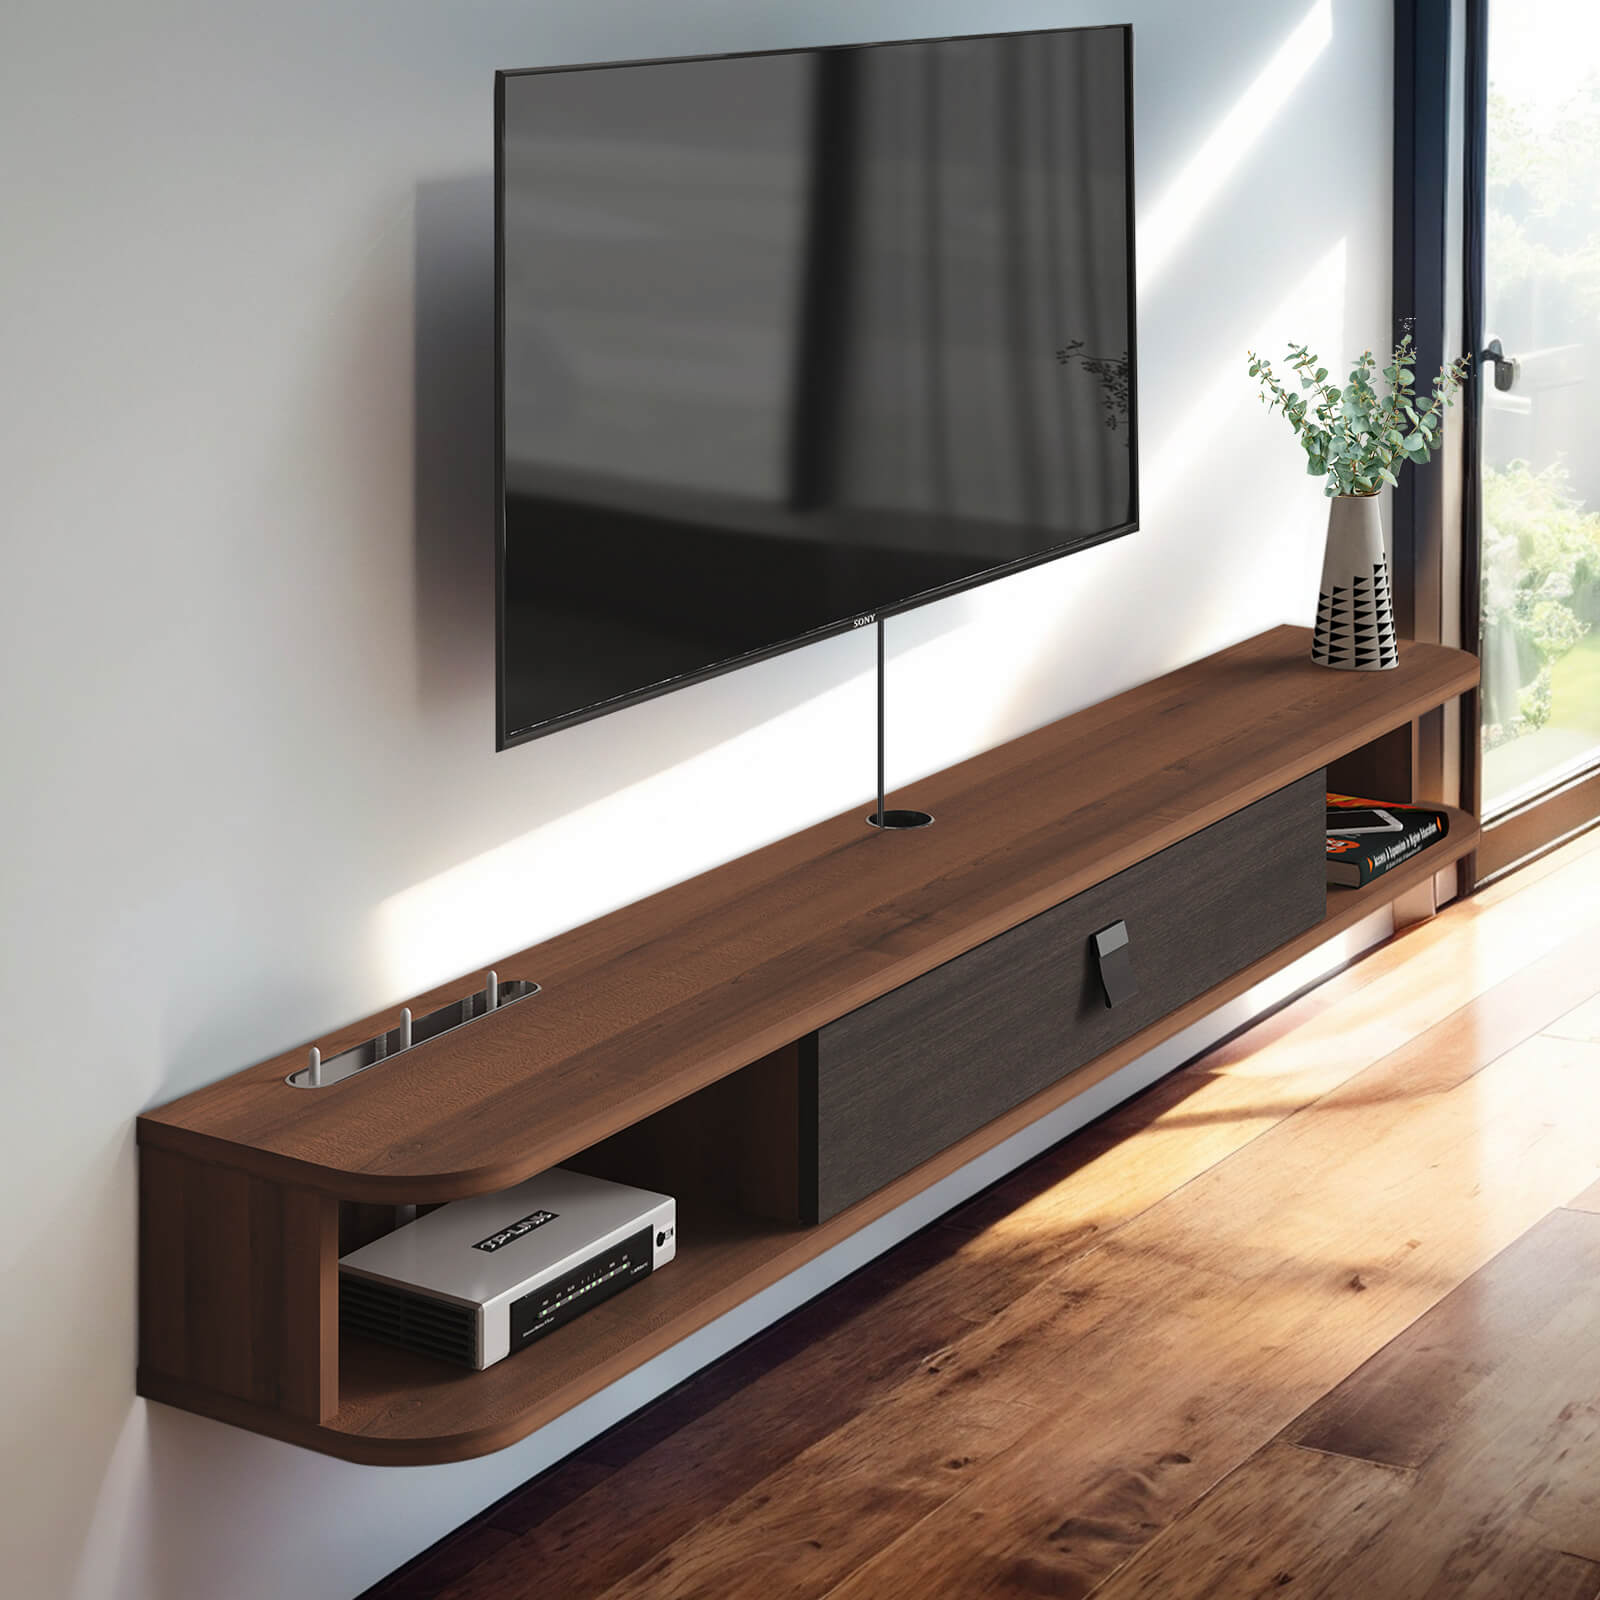 78.74" Walnut Plywood Slim Floating TV Stand for 85" TV